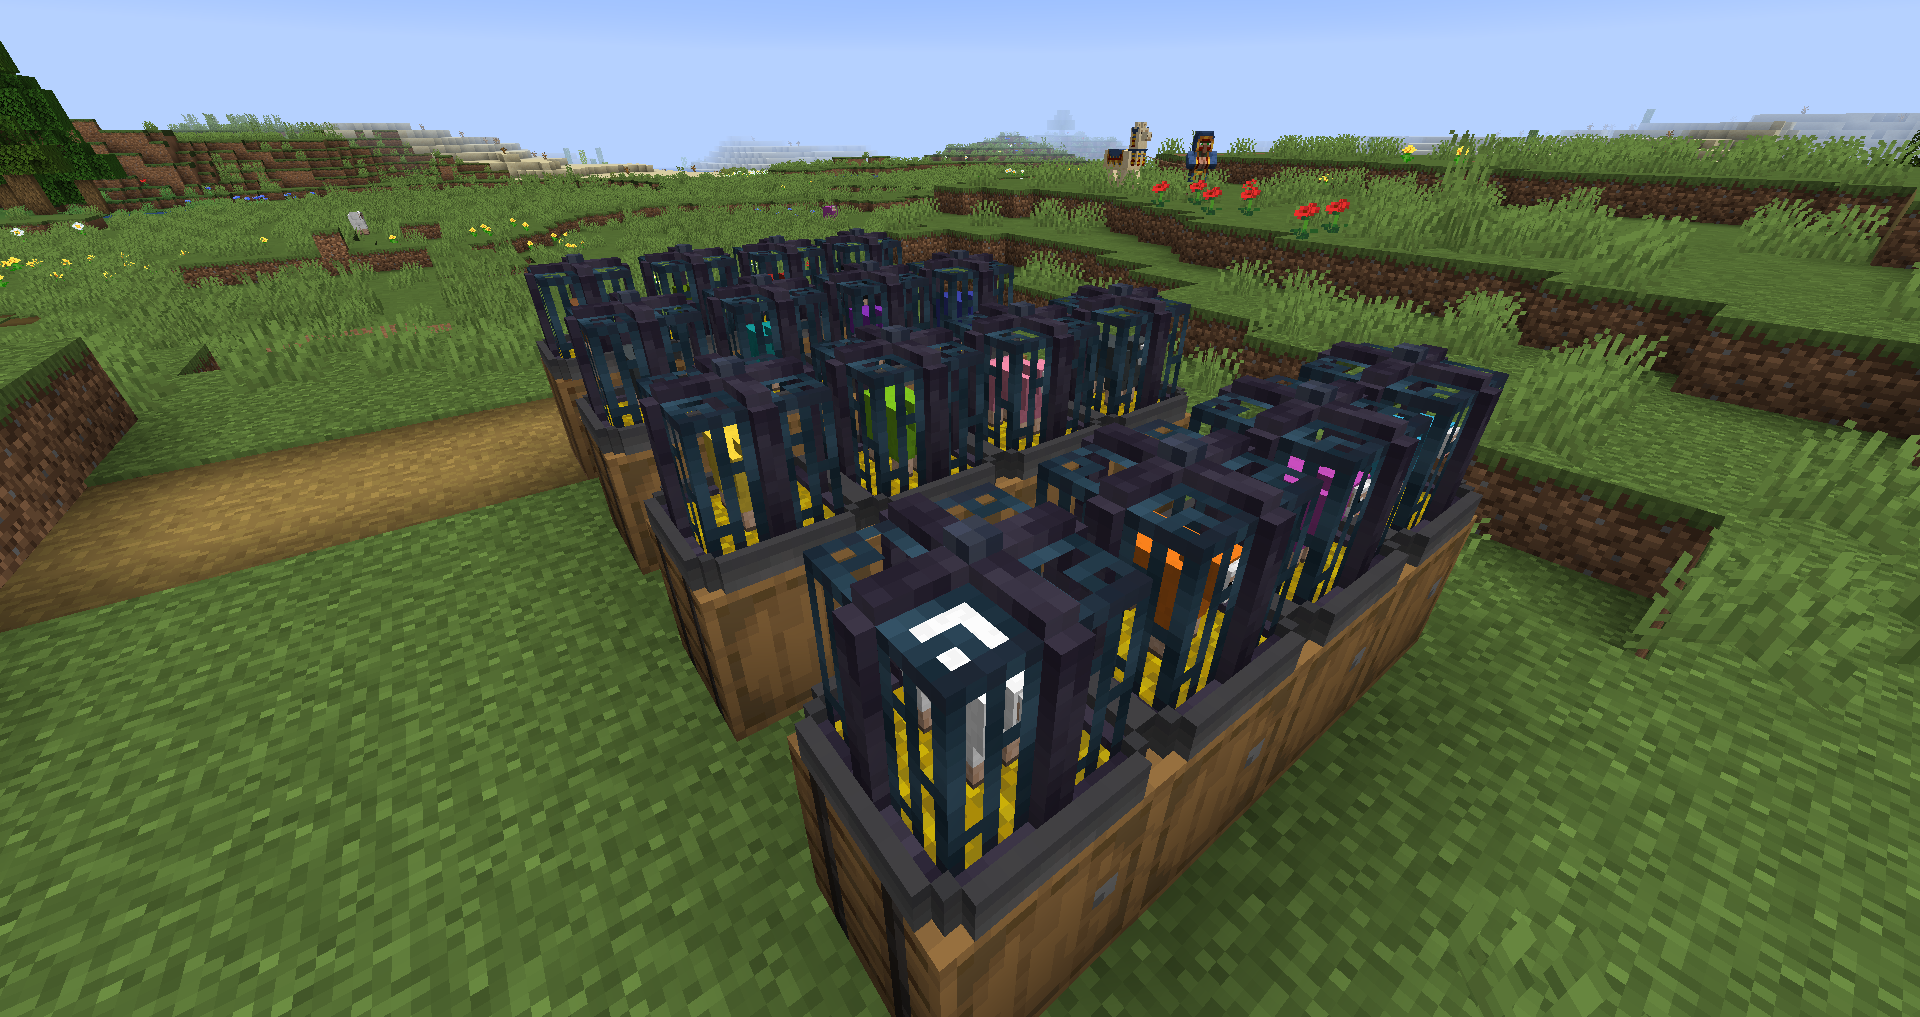 Mob Cage with dyed sheep